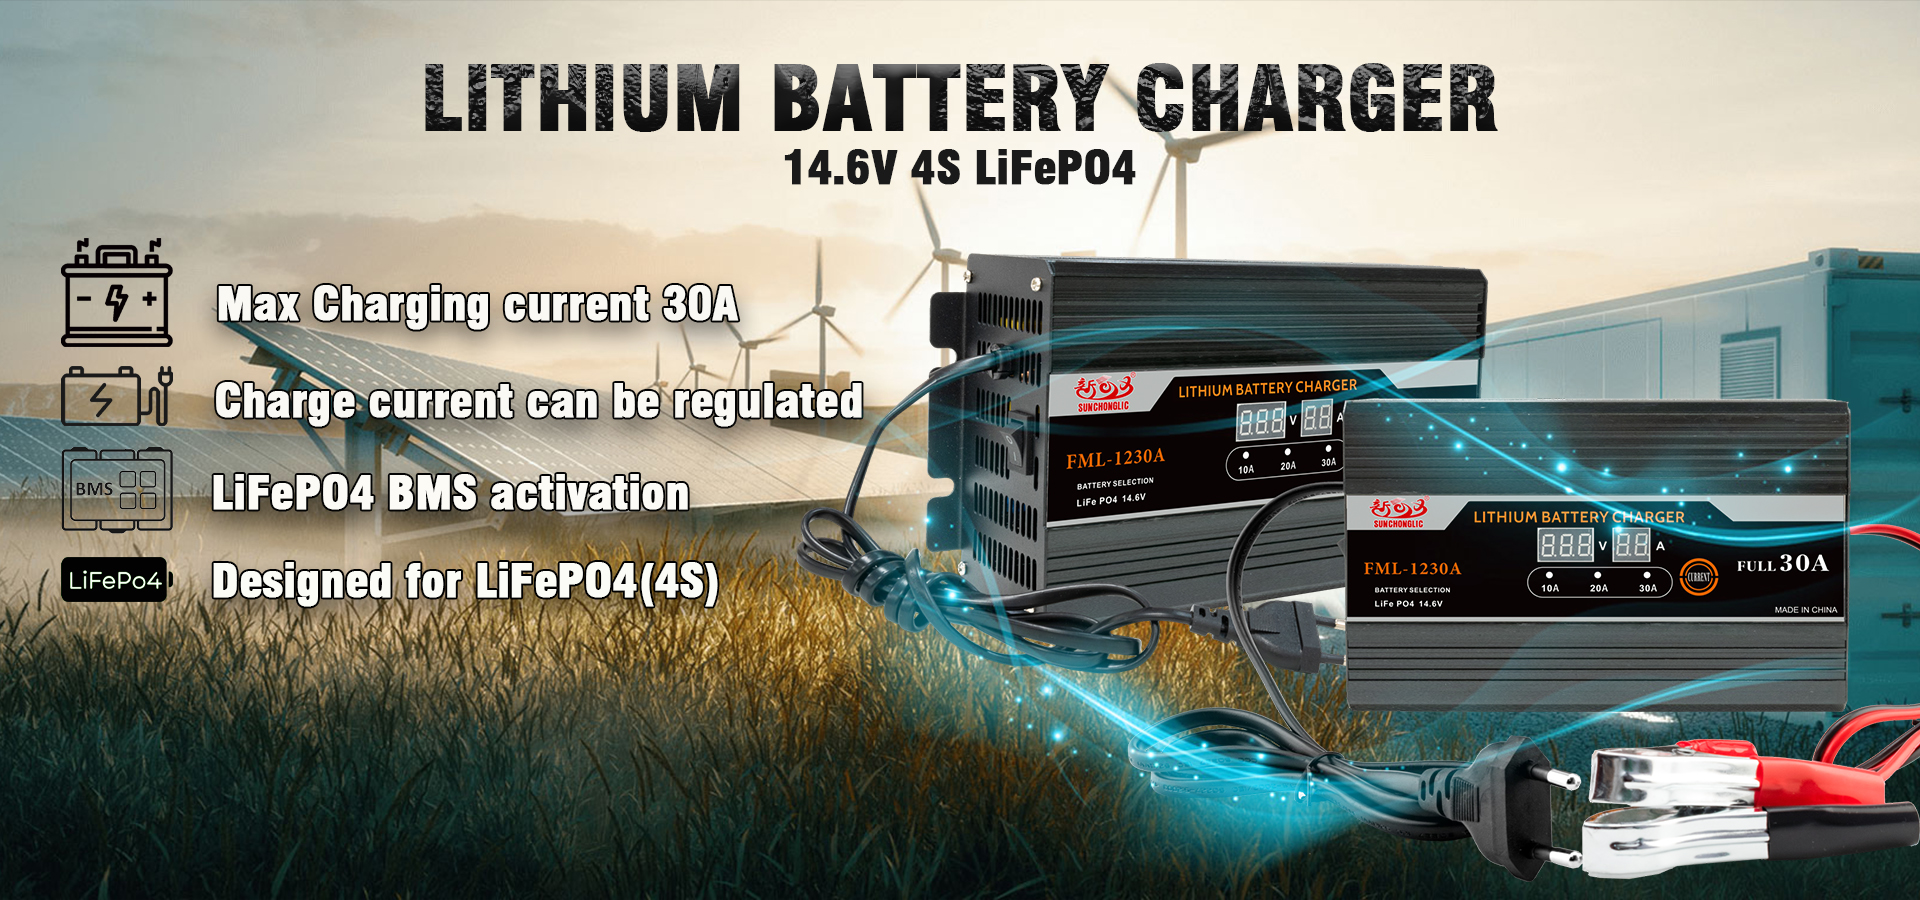 LiFePO4 battery charger